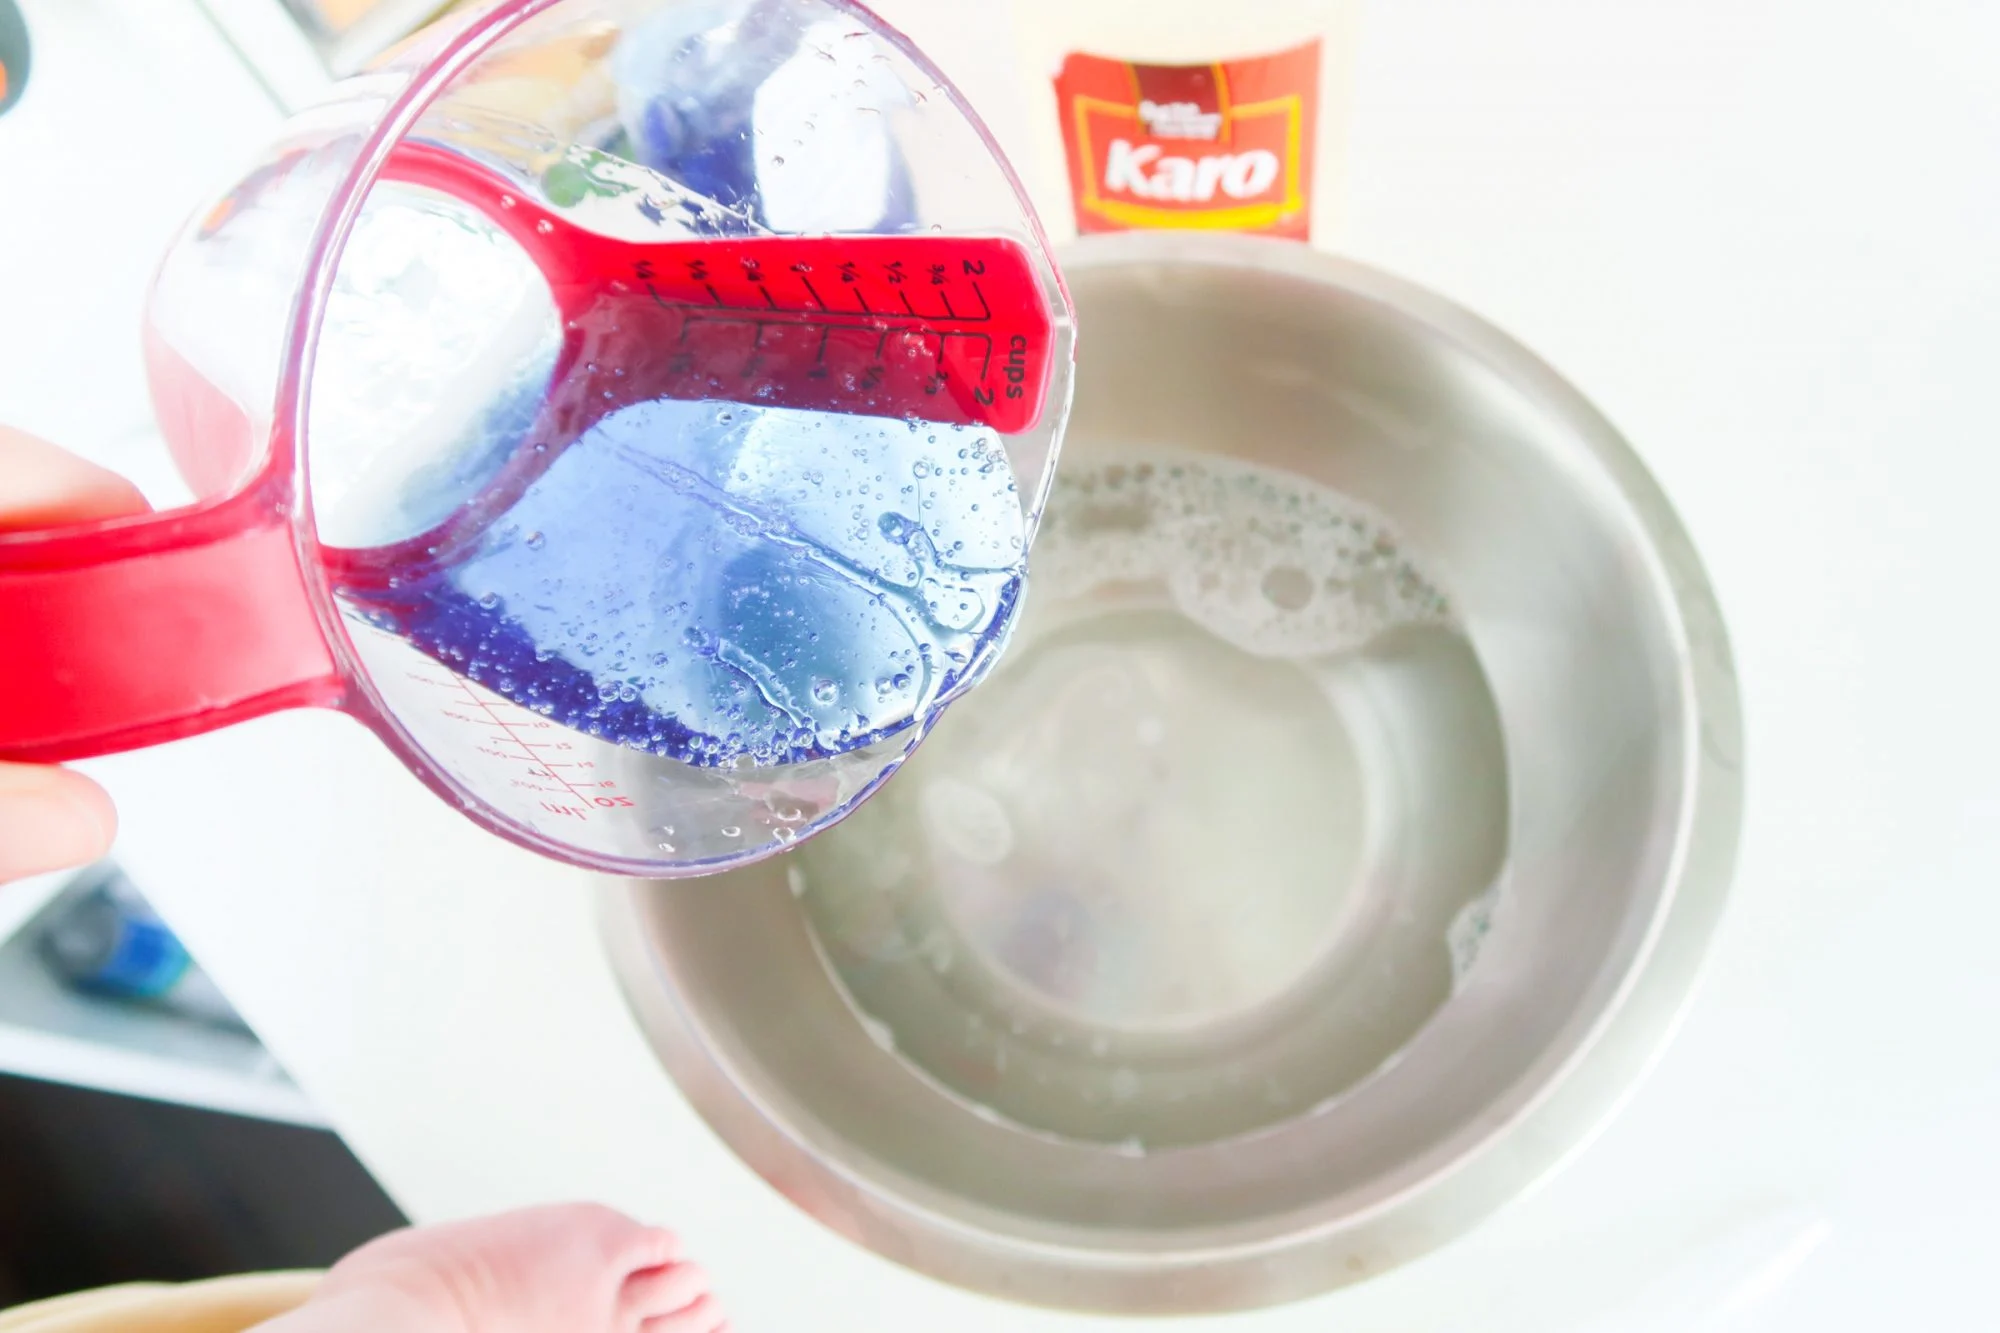 pouring Dawn dish soap into mixing bowl